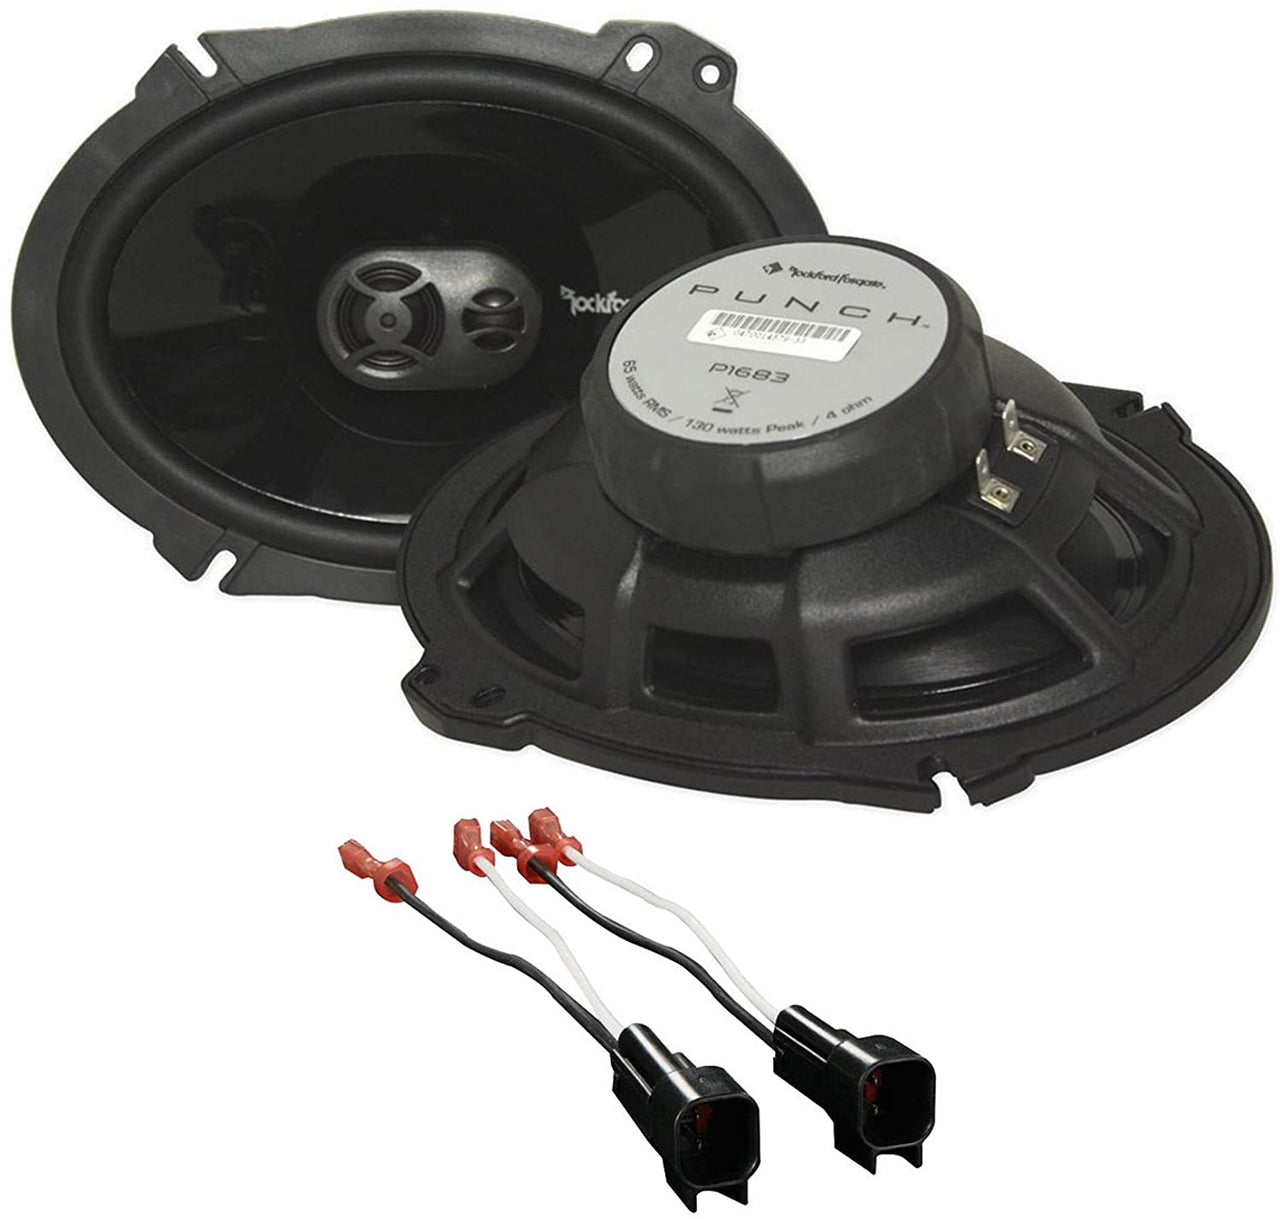 Rockford Fosgate P1683 6x8" Rear Speaker Replacement Kit & Absolute USA AS5600 Speaker Harness for 2000-10 Ford F-650/750